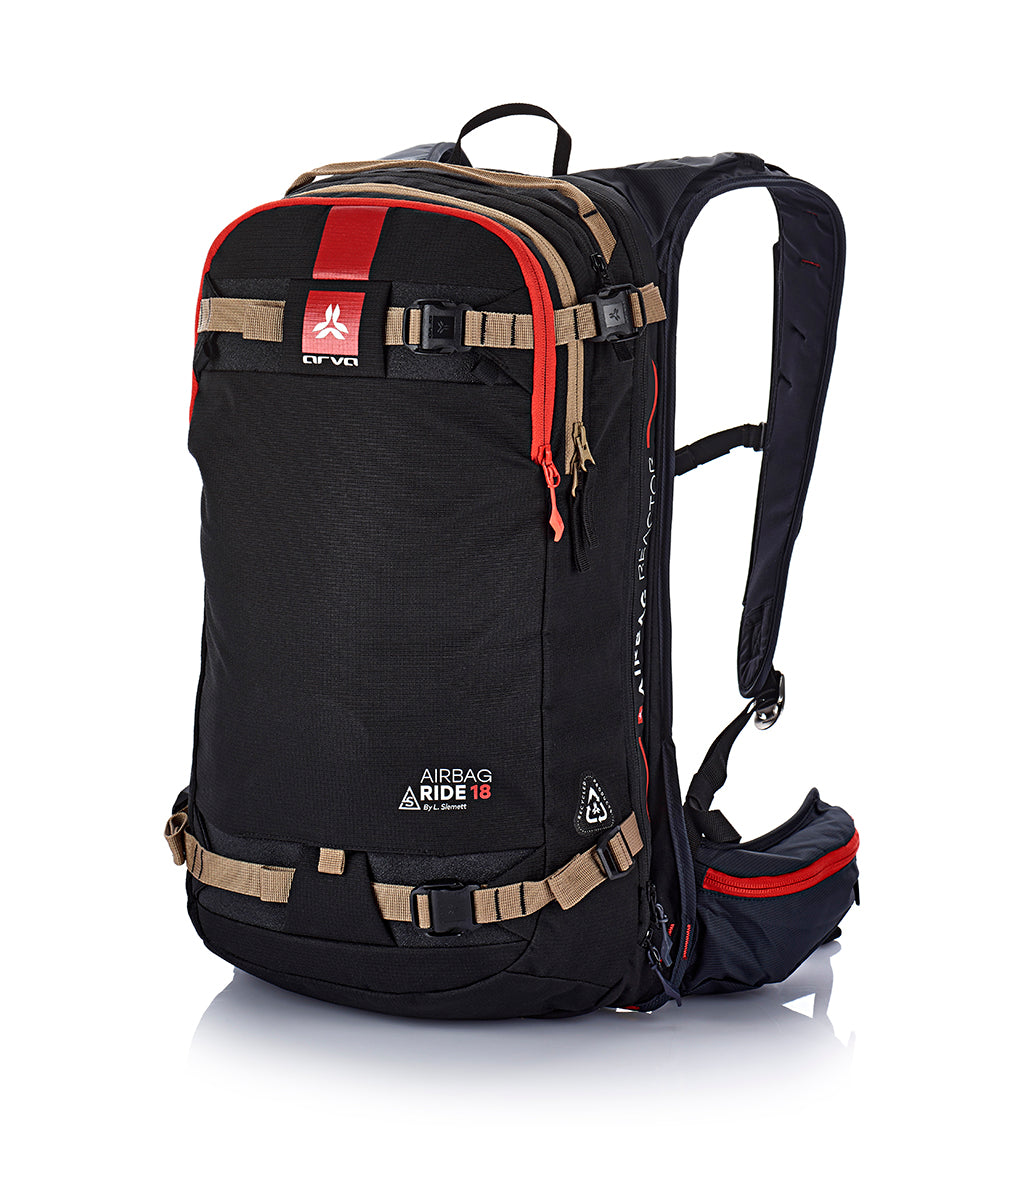 Arva-Ride 18 Switch Airbag, Avalanche Airbag, Avalanche Safety, Avalanche Bags, Freeride Bags